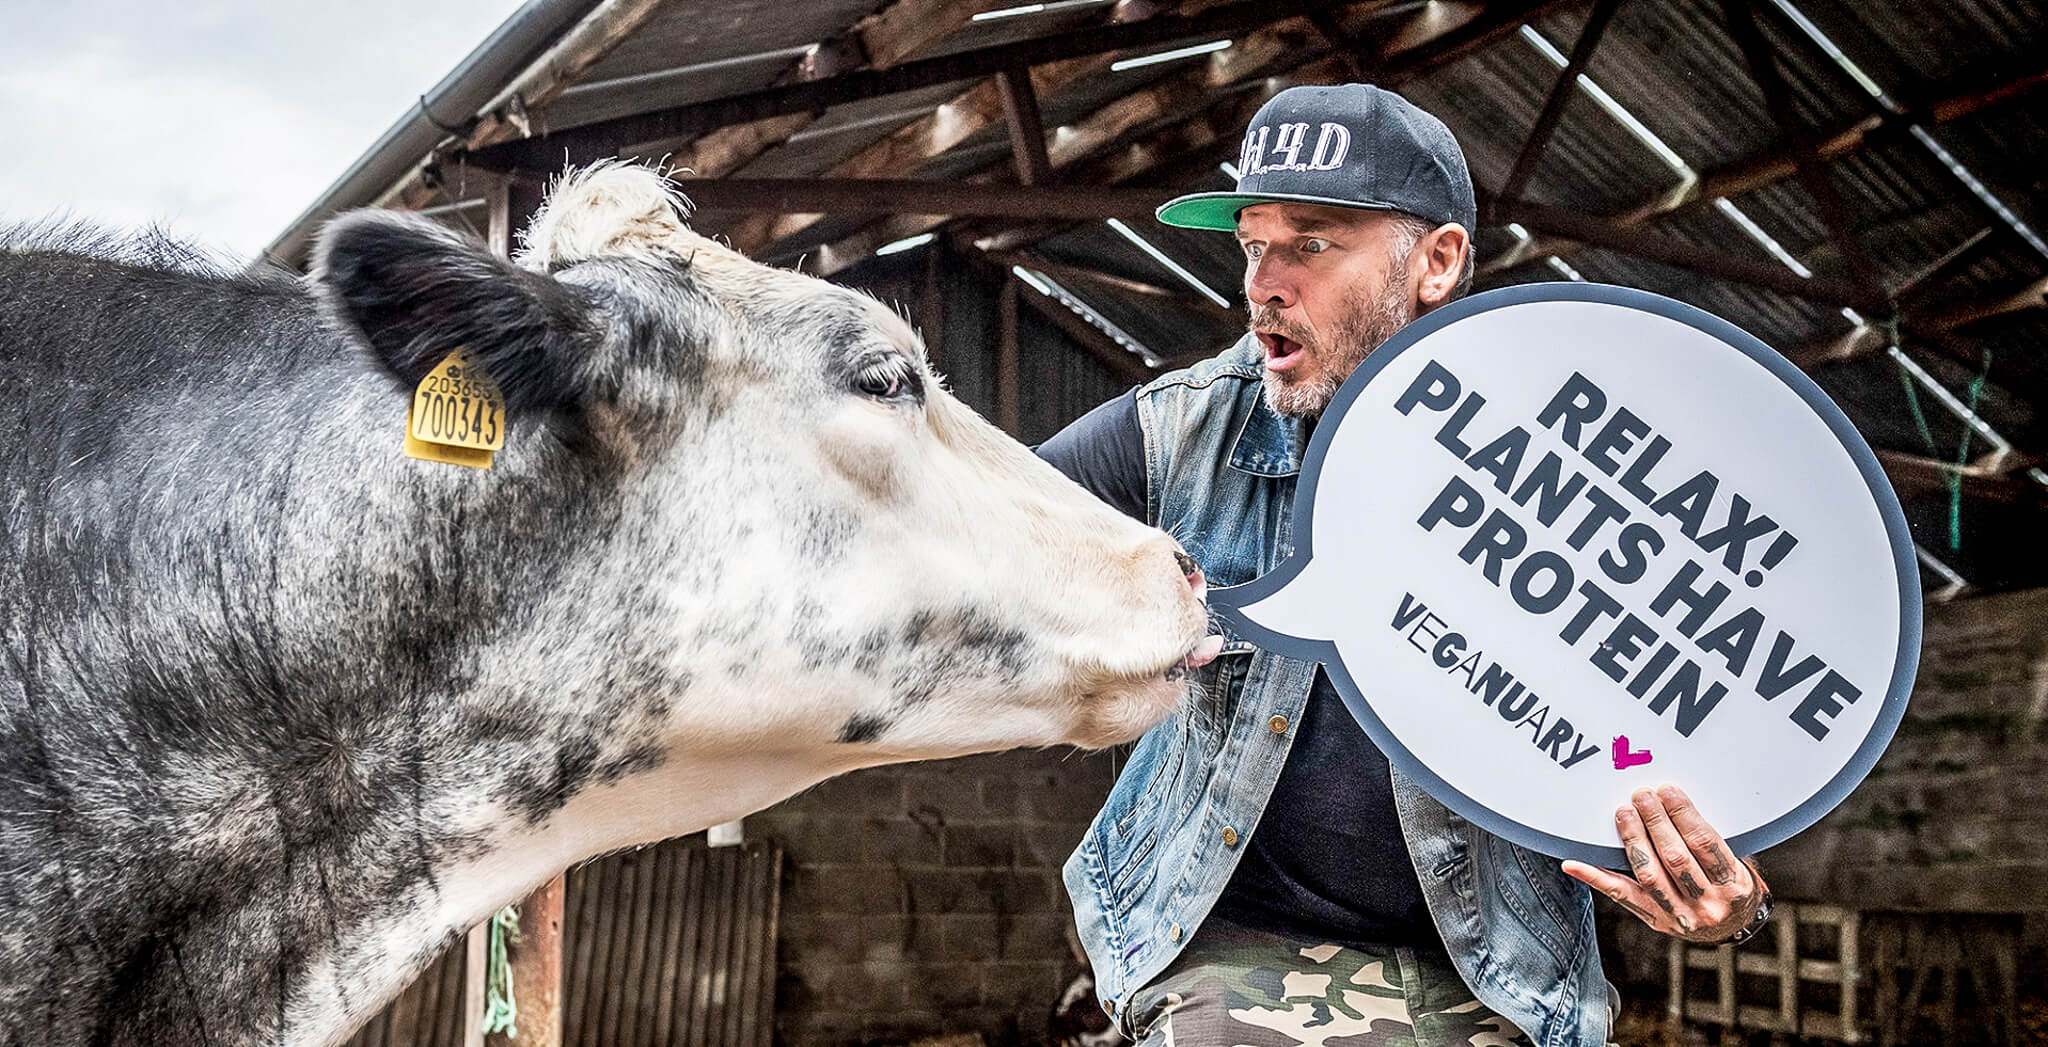 Man petting cow and holding a sign saying "Relax, plants have protein".